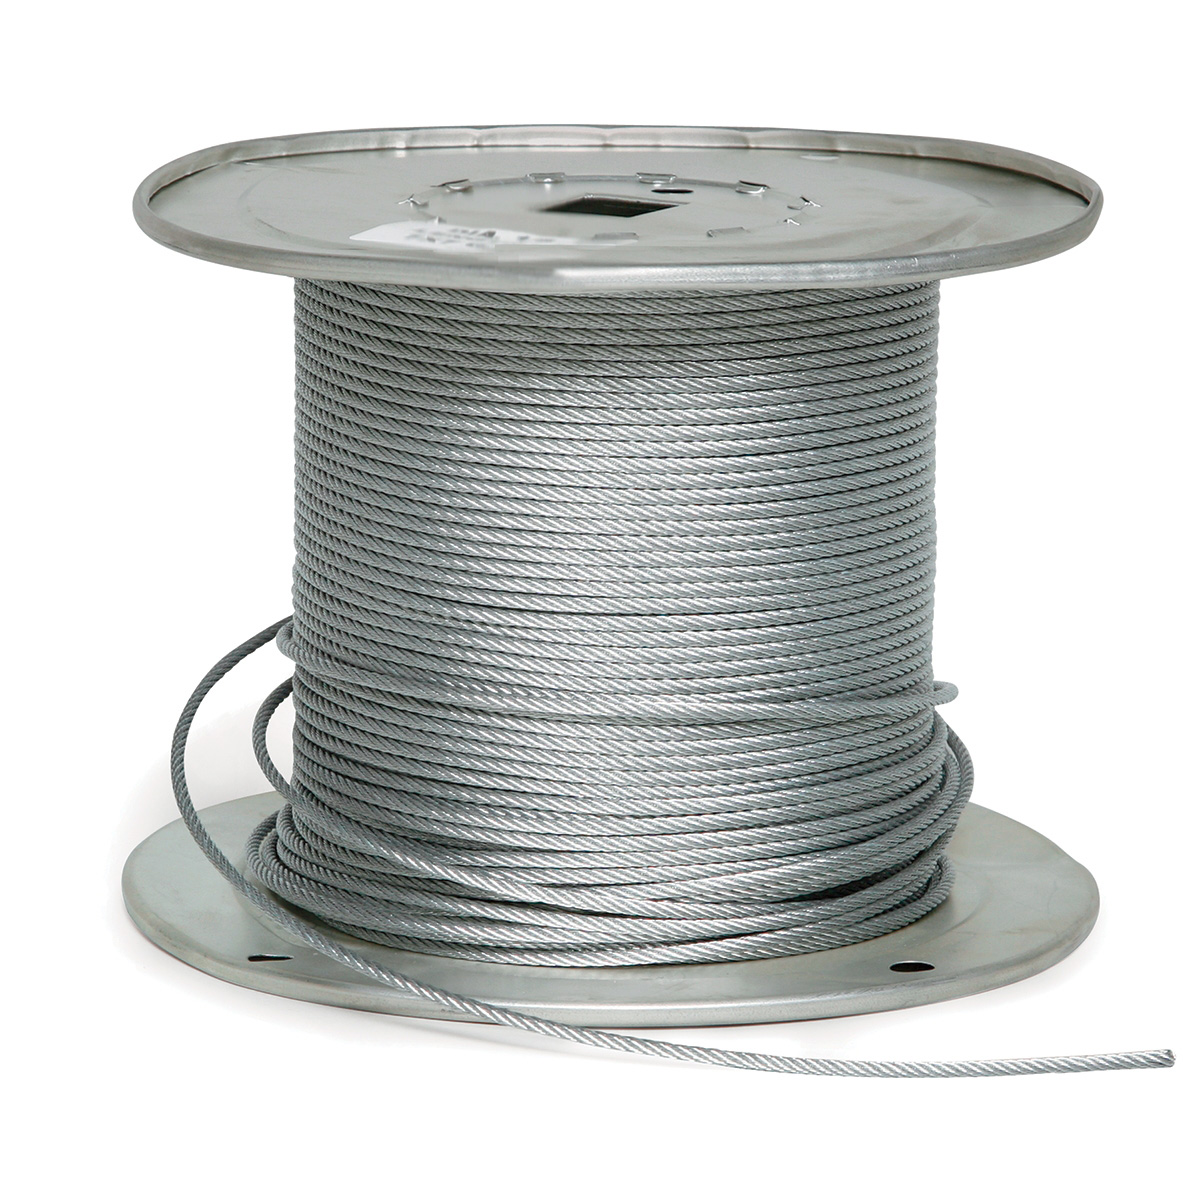 2g9250-00250 0.25 Dia. X 250 Ft. 7 X 19 Galvanized Aircraft Cable